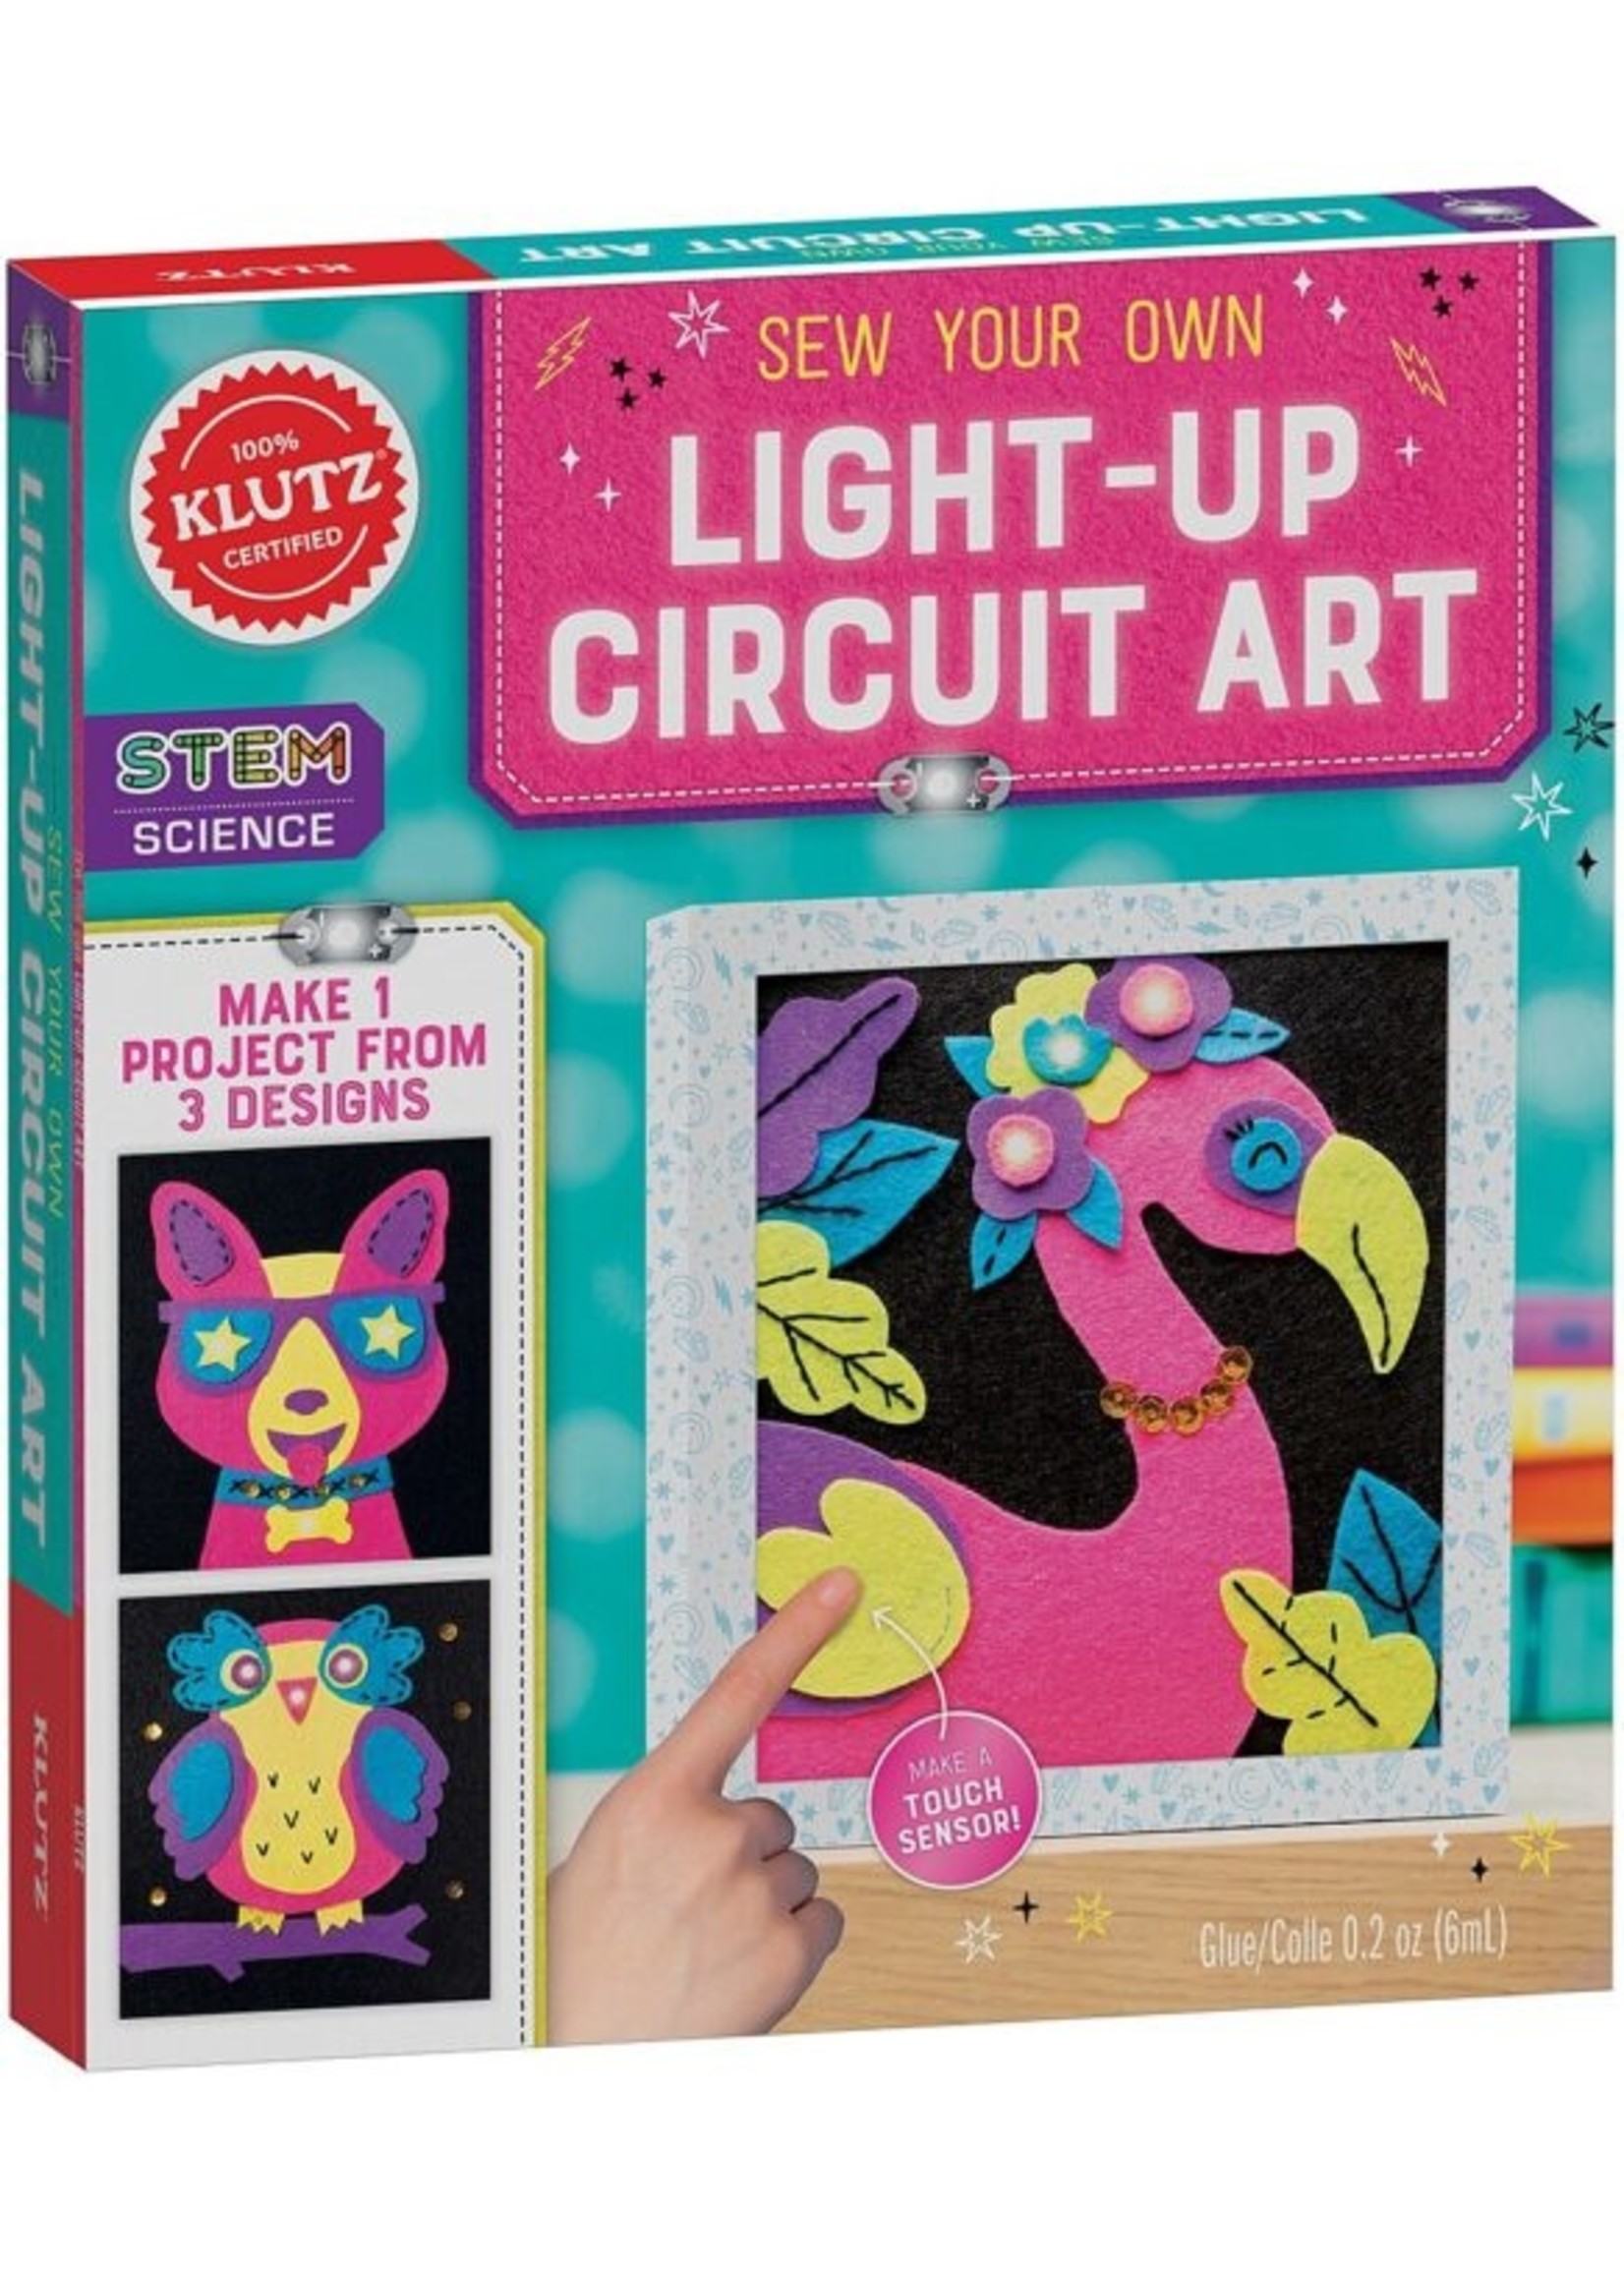 Klutz Sew Your Own Light-up Circuit Art